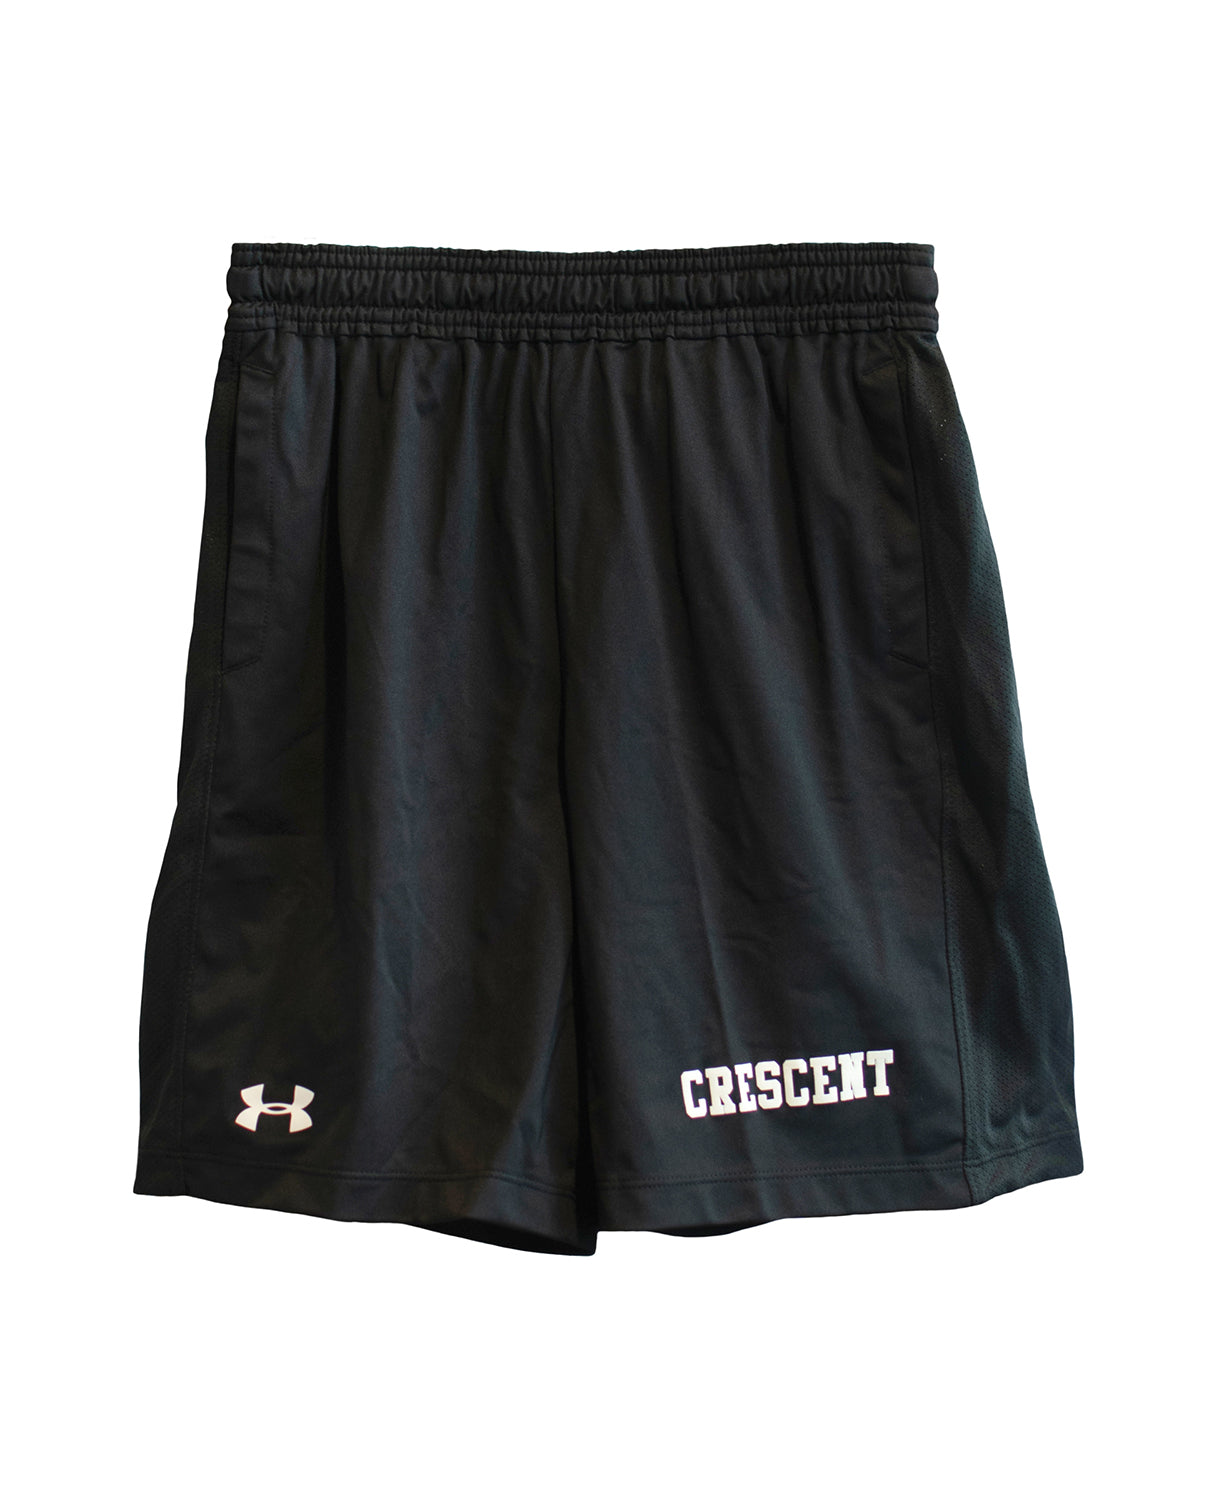 Youth Under Armour Black Gym Shorts